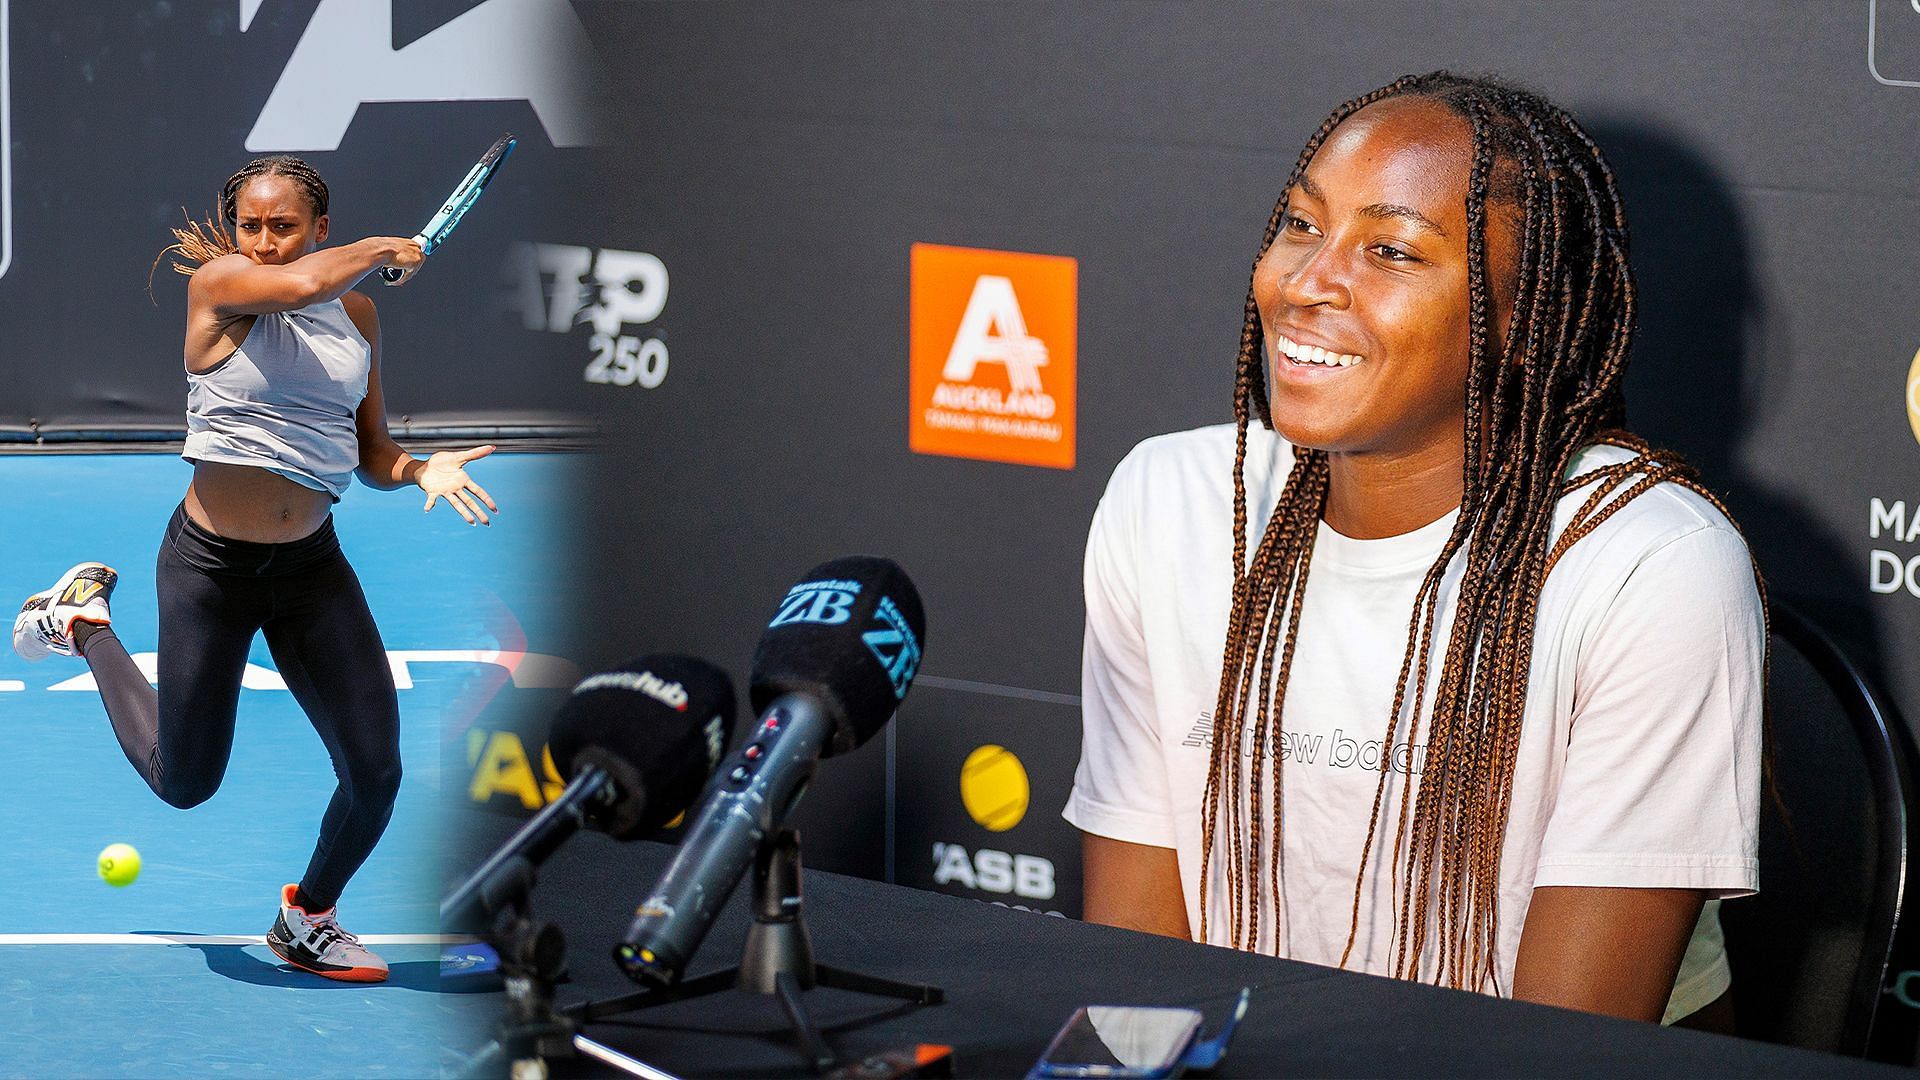 Coco Gauff reached her first quarterfinal of the year